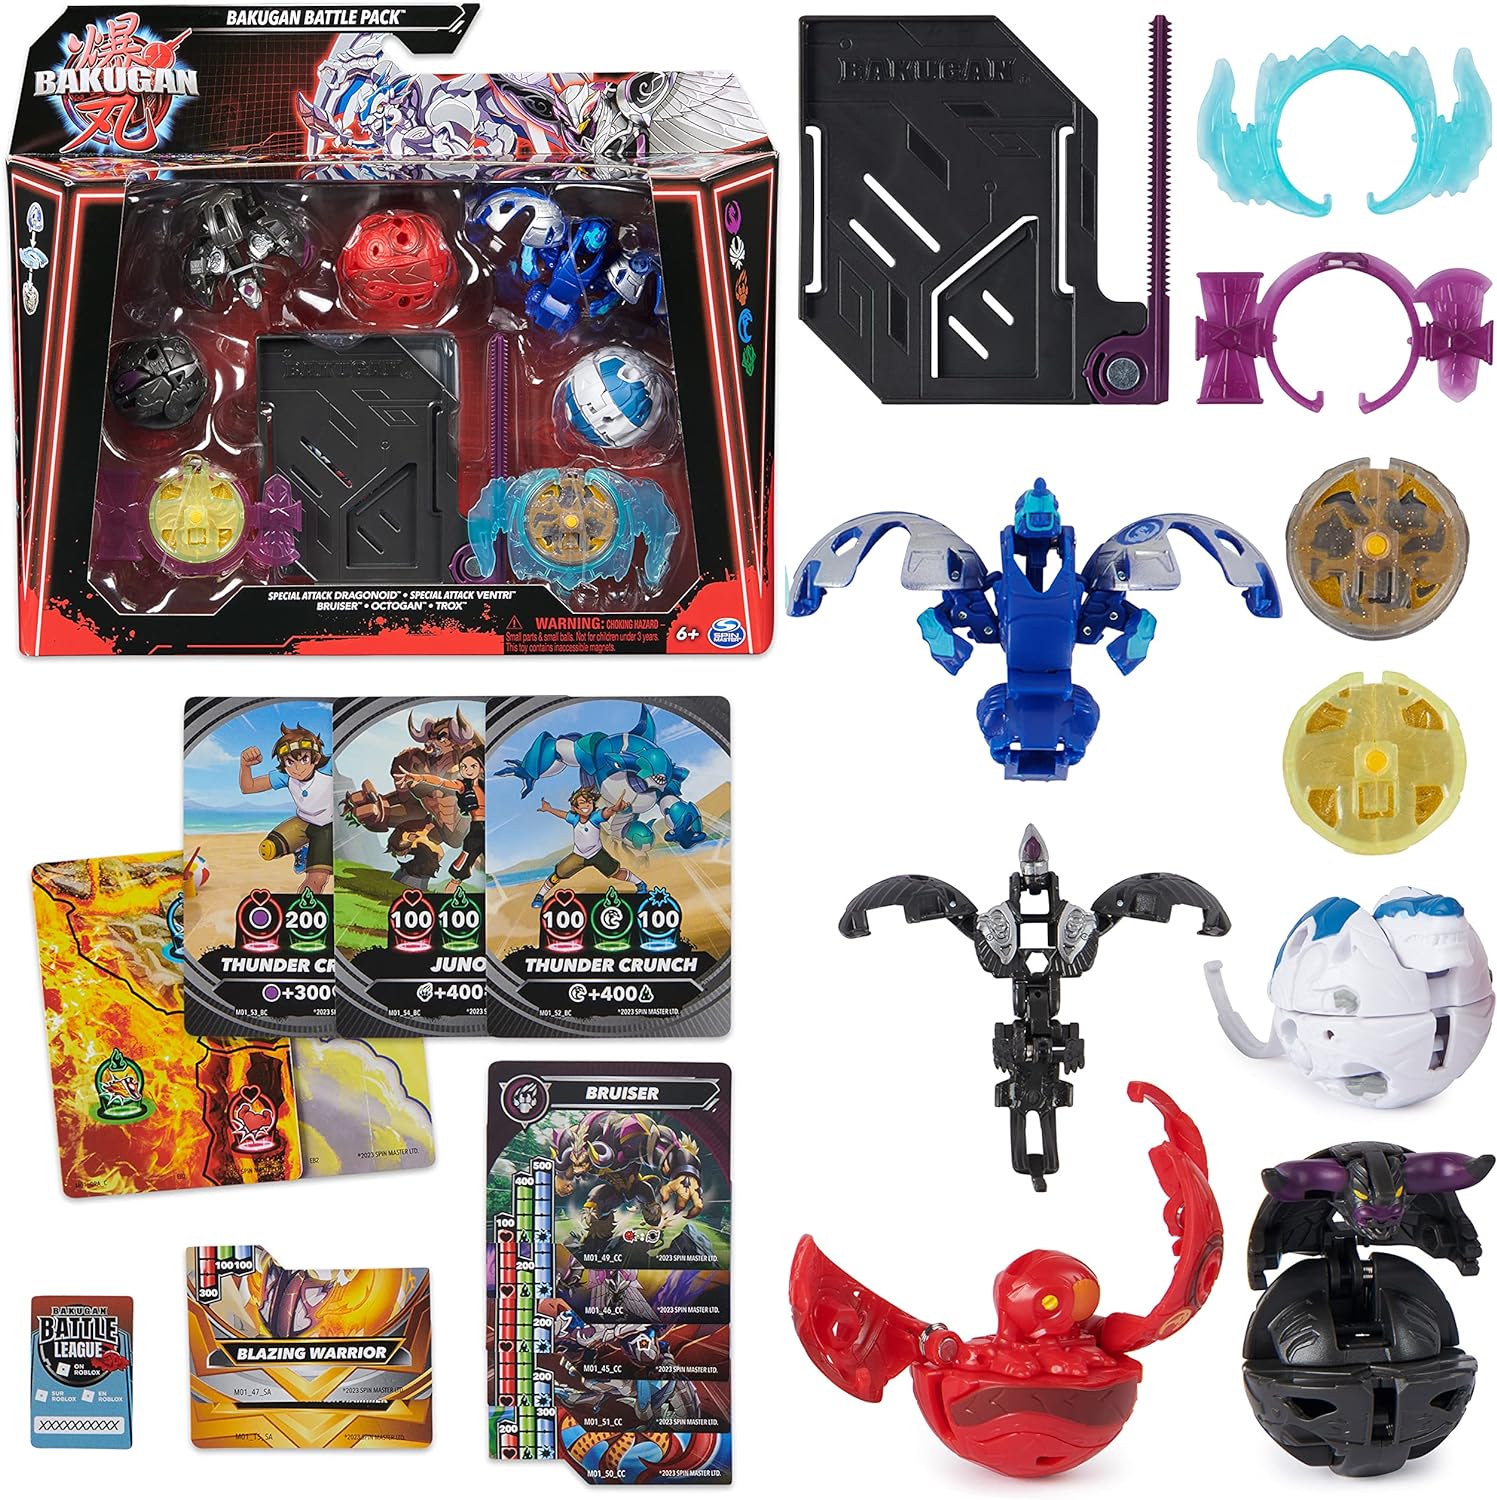 Bakugan Evolutions - Wrath 2-inch Core Collectible Figure and Trading Cards